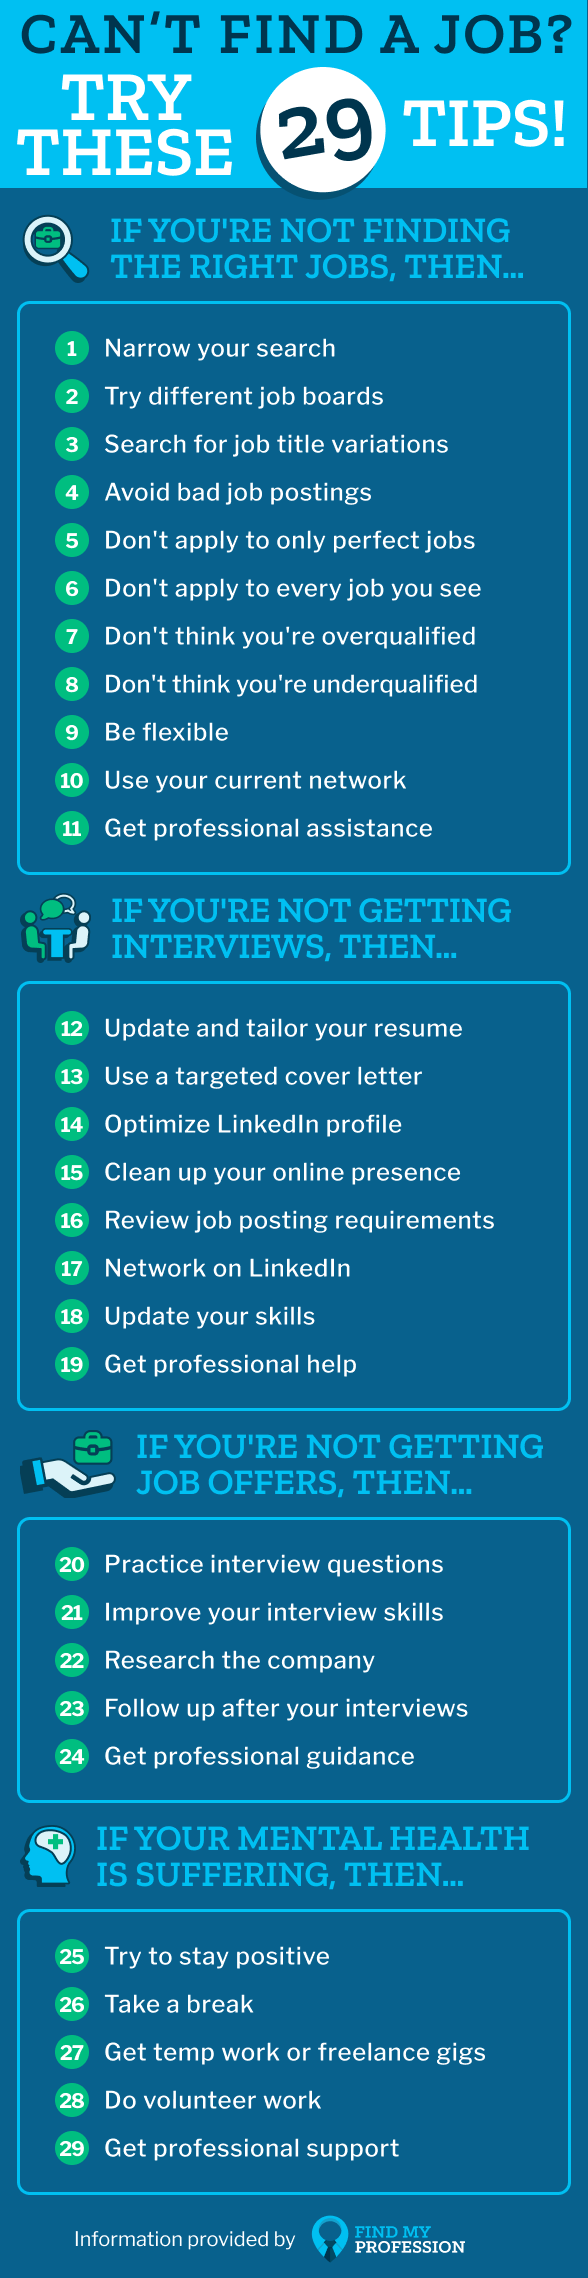 29 Tips If You Can’t Find A Job